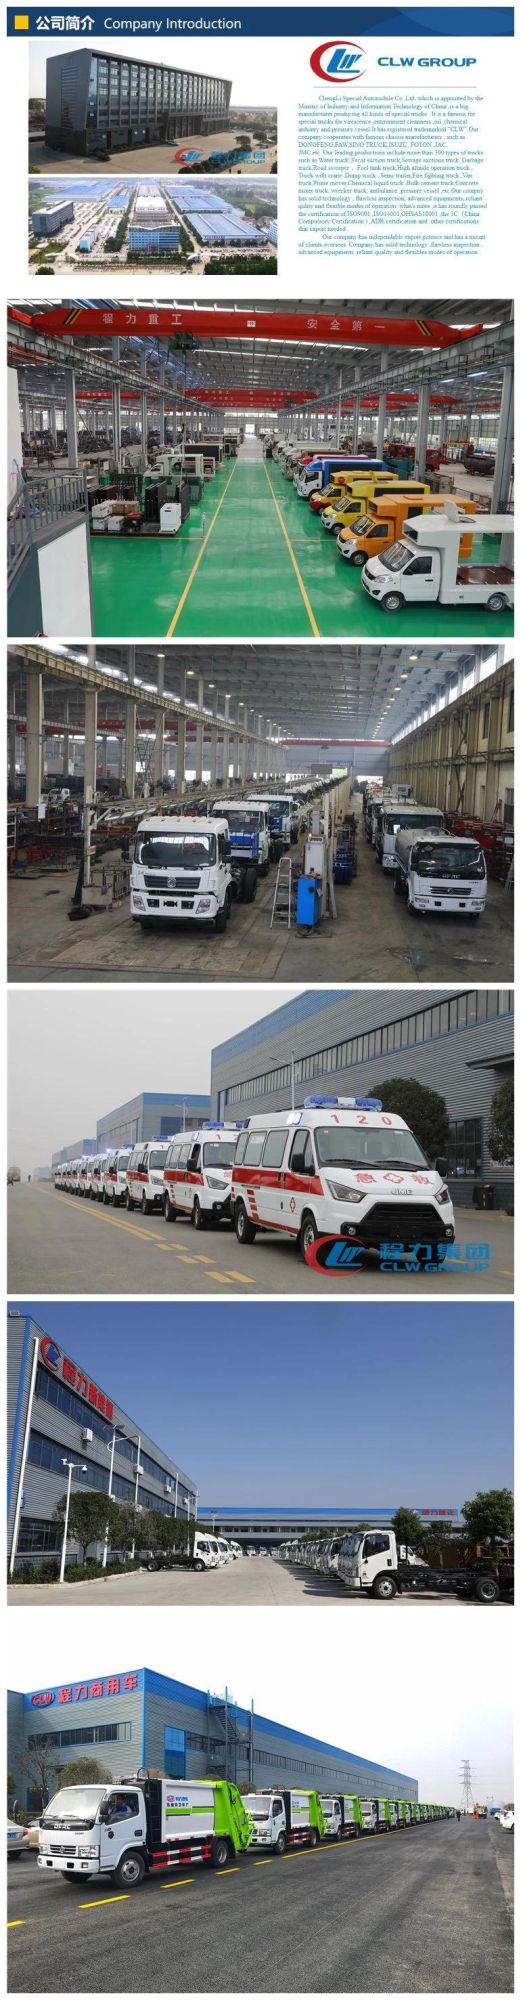 Exported to Chile Euro 4 Engine 4X2 1suzu Japan Chassis 4000liter Fire Truck 1200gallons Water Fire Engine Cheap Price